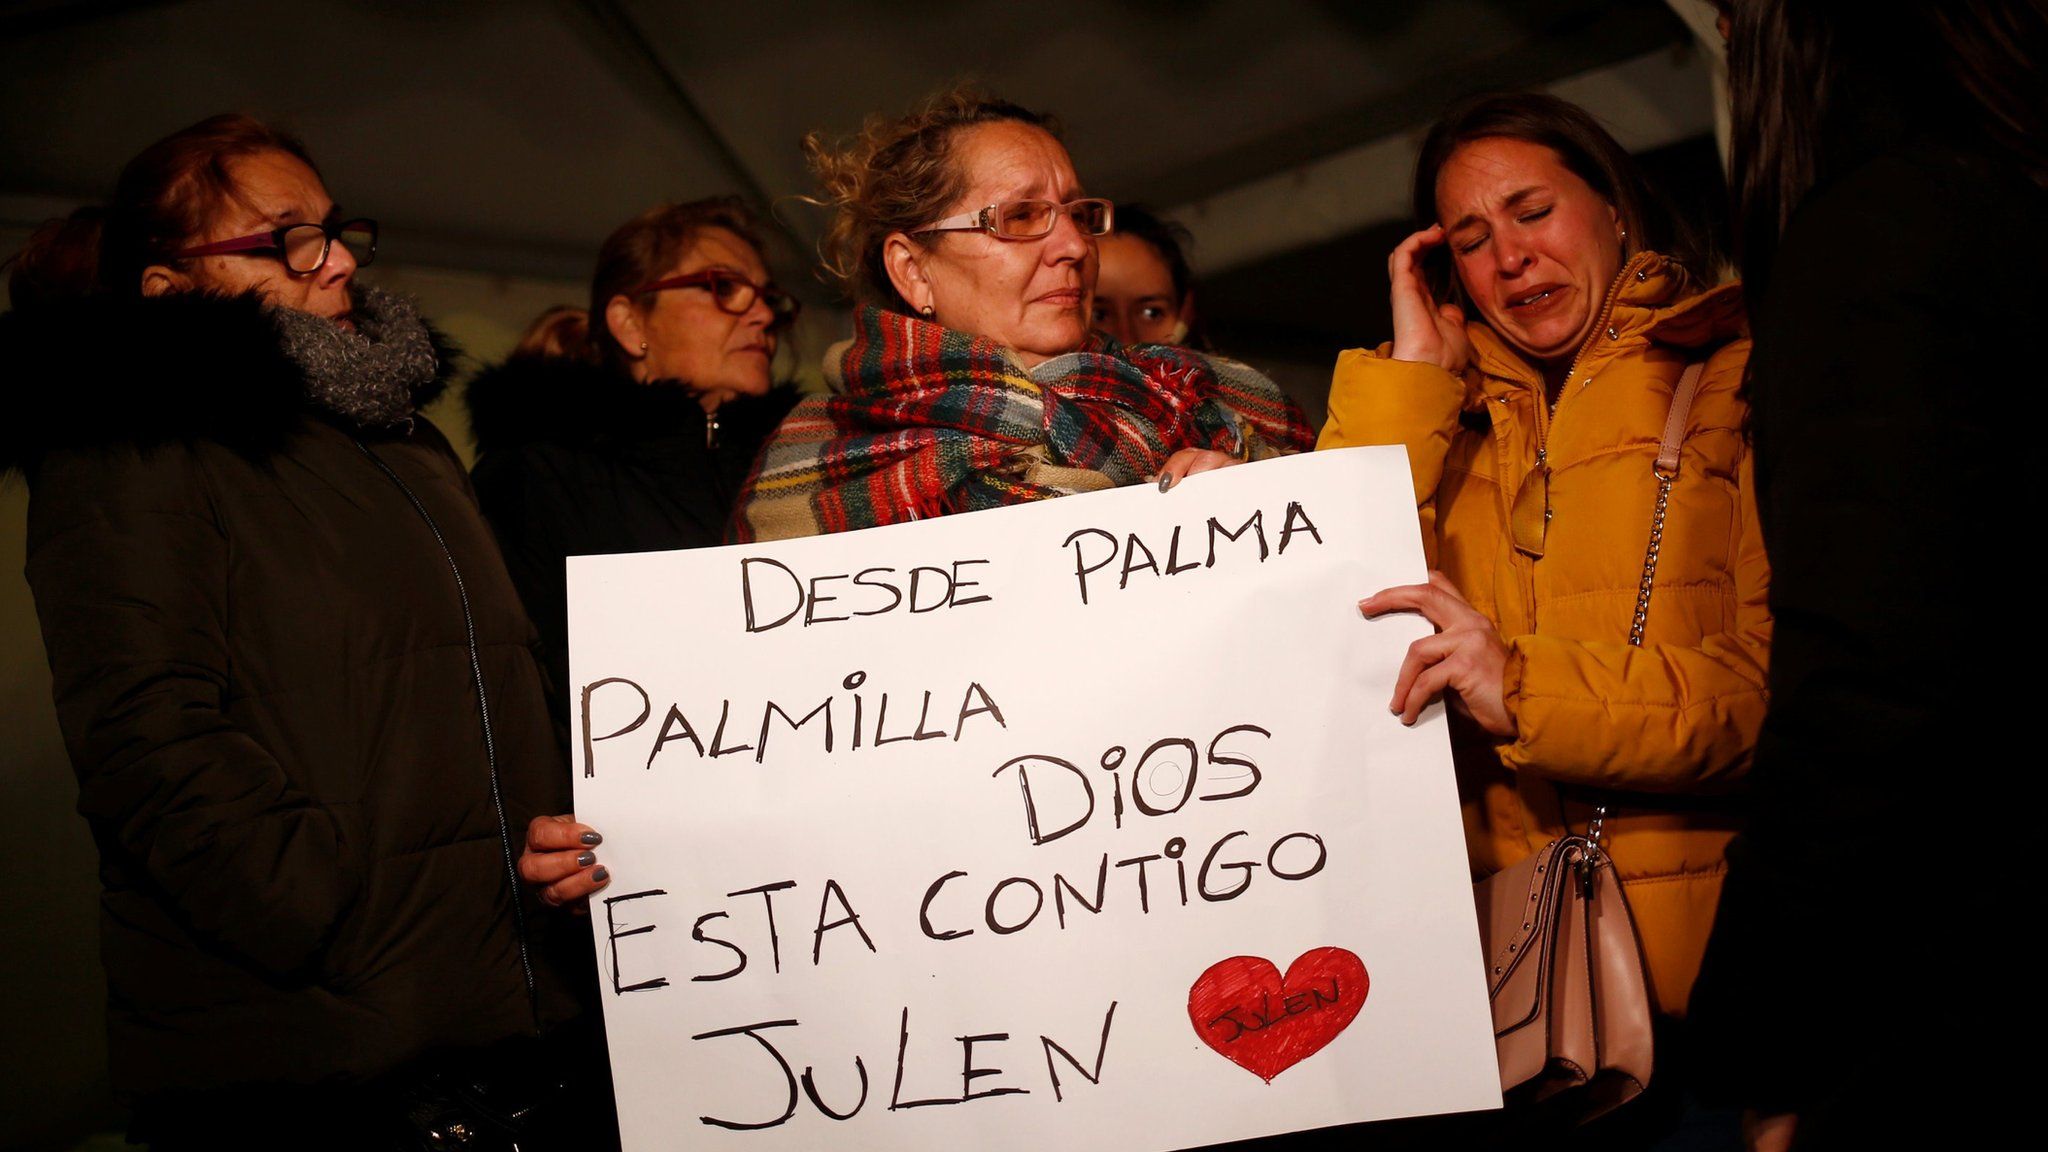 Women crying at a vigil on 24 January, holding a banner that reads: "From Palma Palmilla, God is with you, Julen"